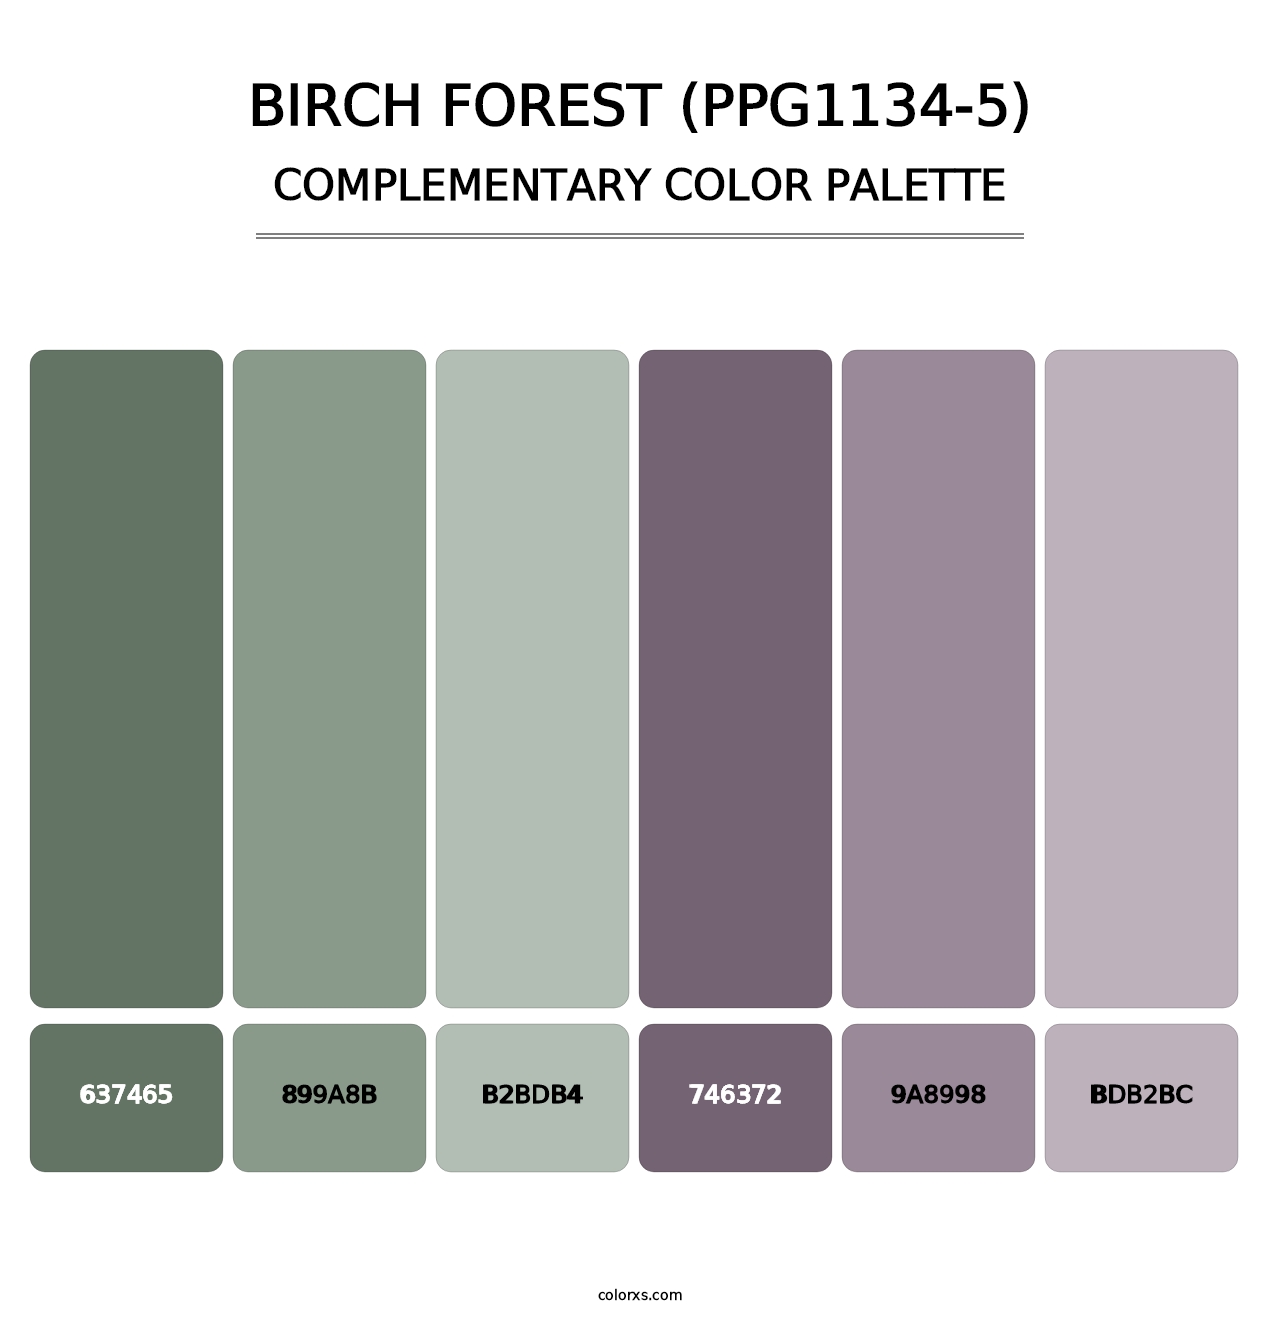 Birch Forest (PPG1134-5) - Complementary Color Palette